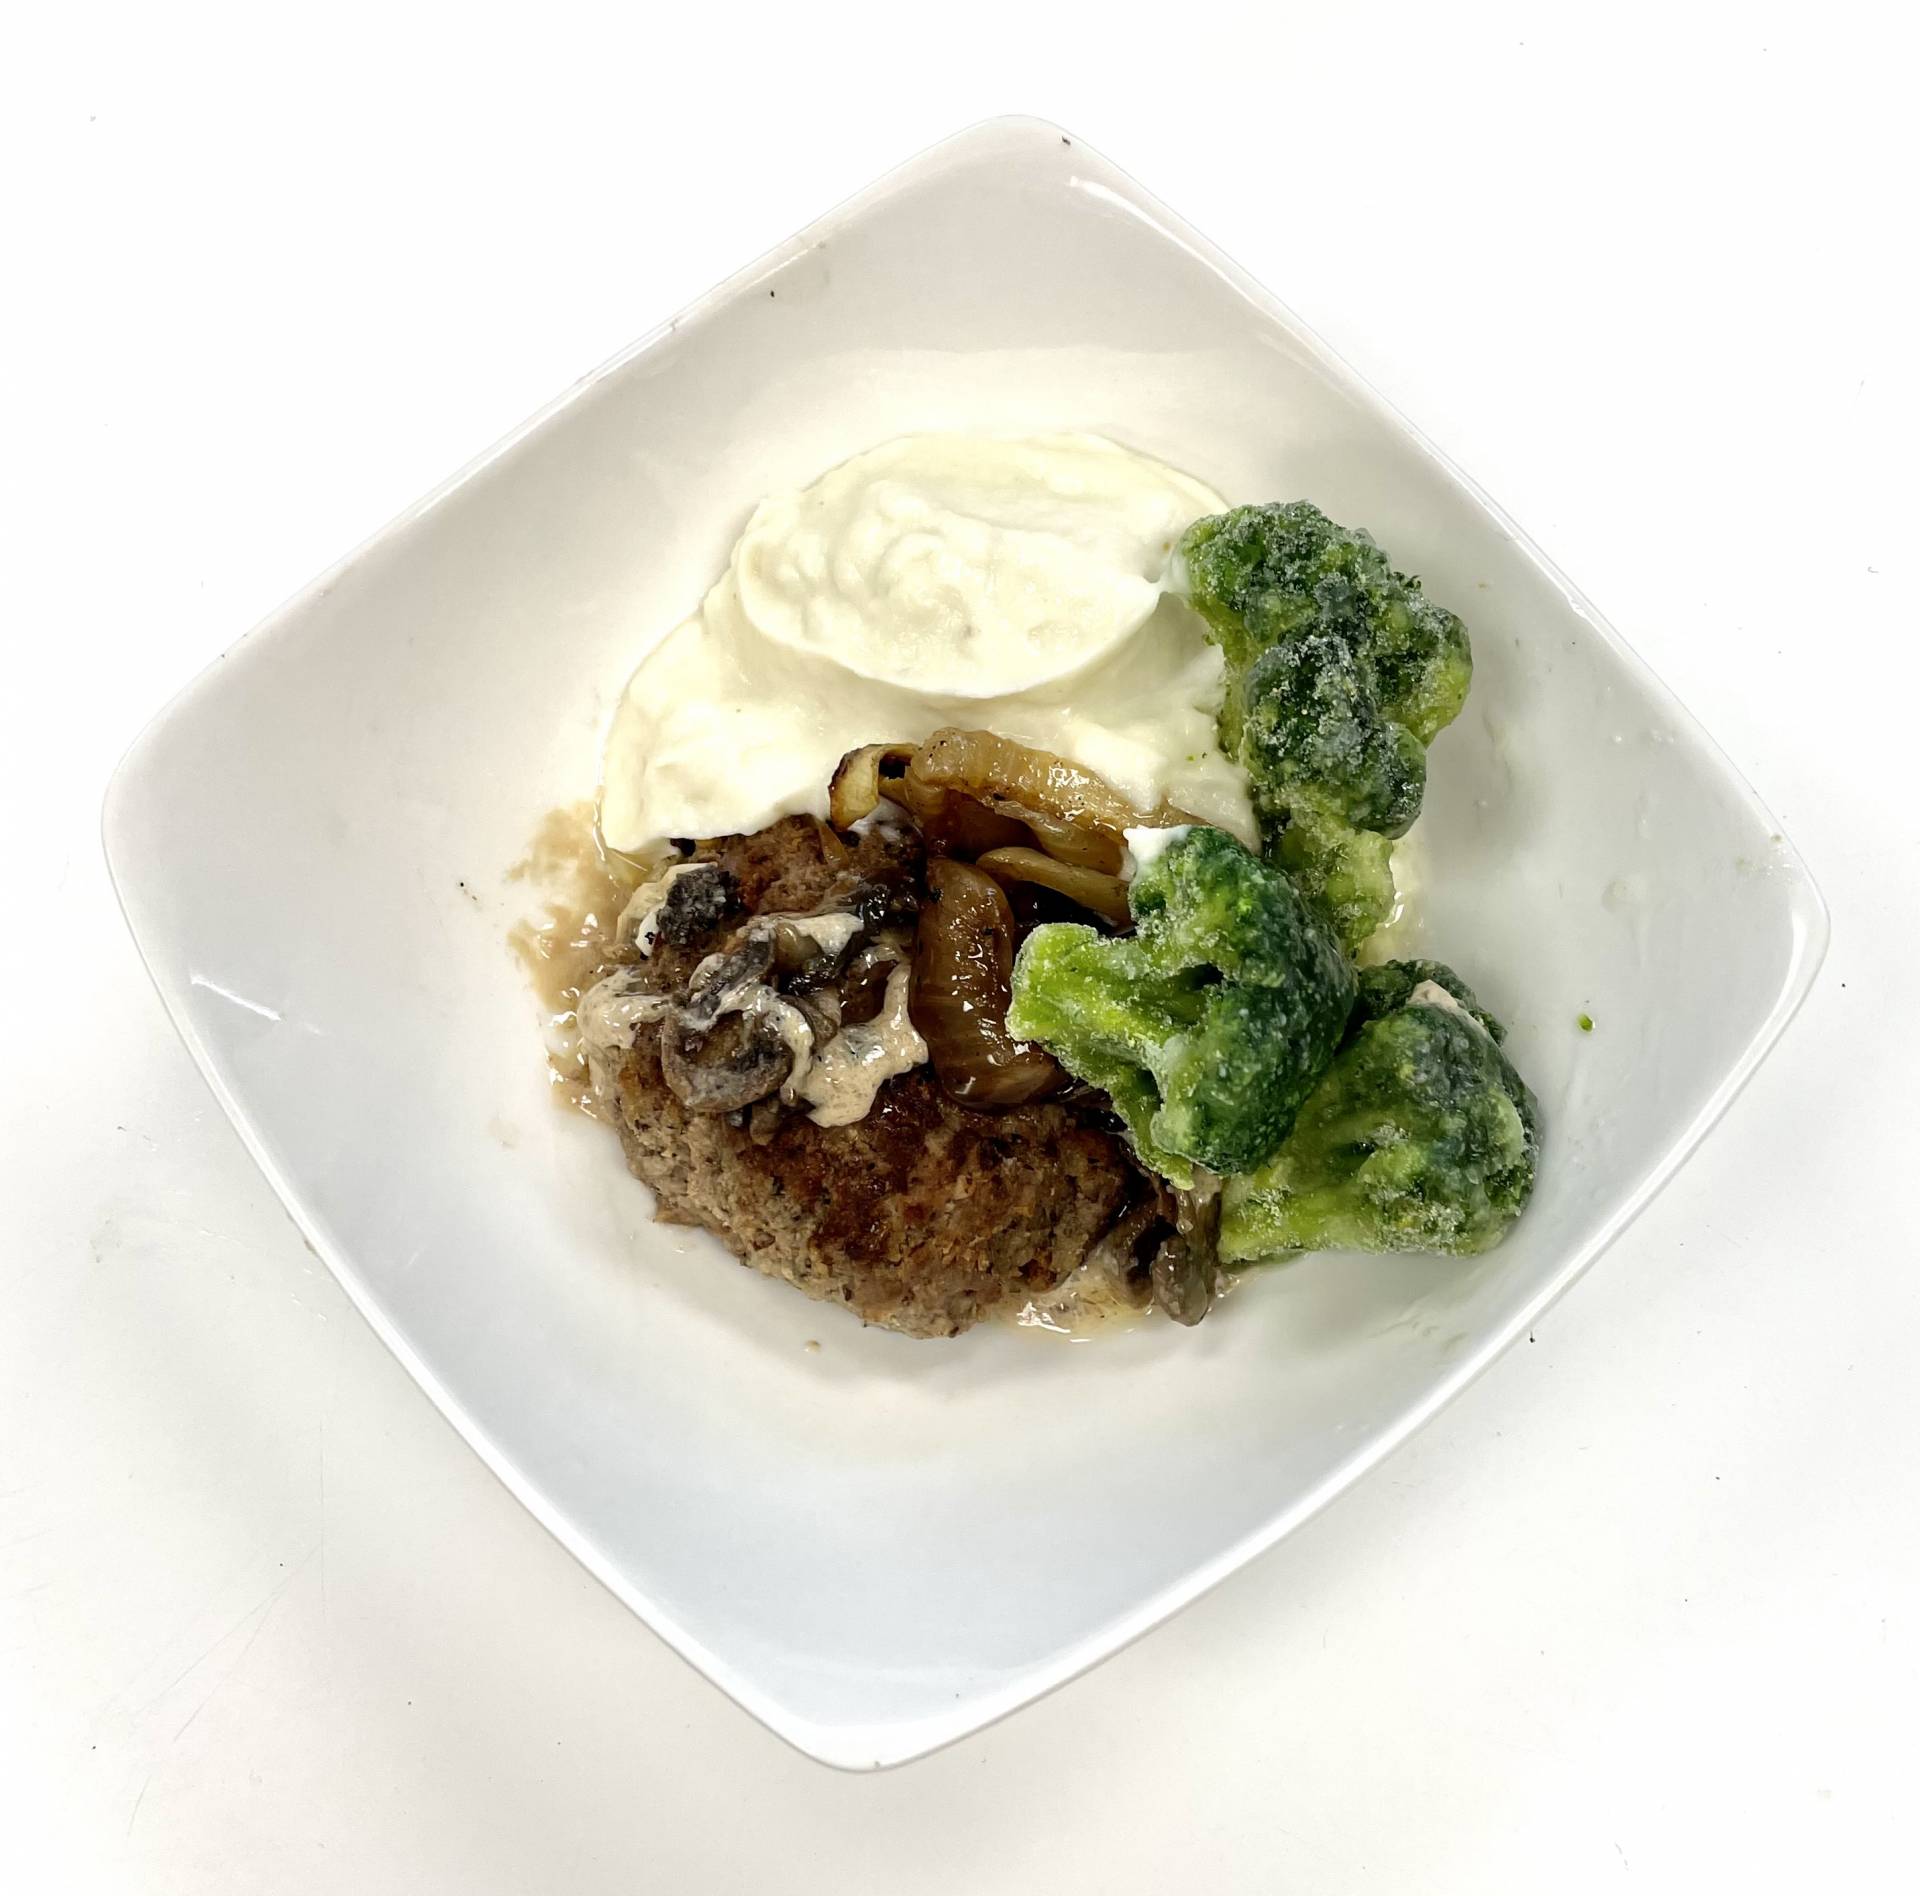 Hamburger Steaks with Beef Gravy and Oven Roasted Vegetable Medley - Keto